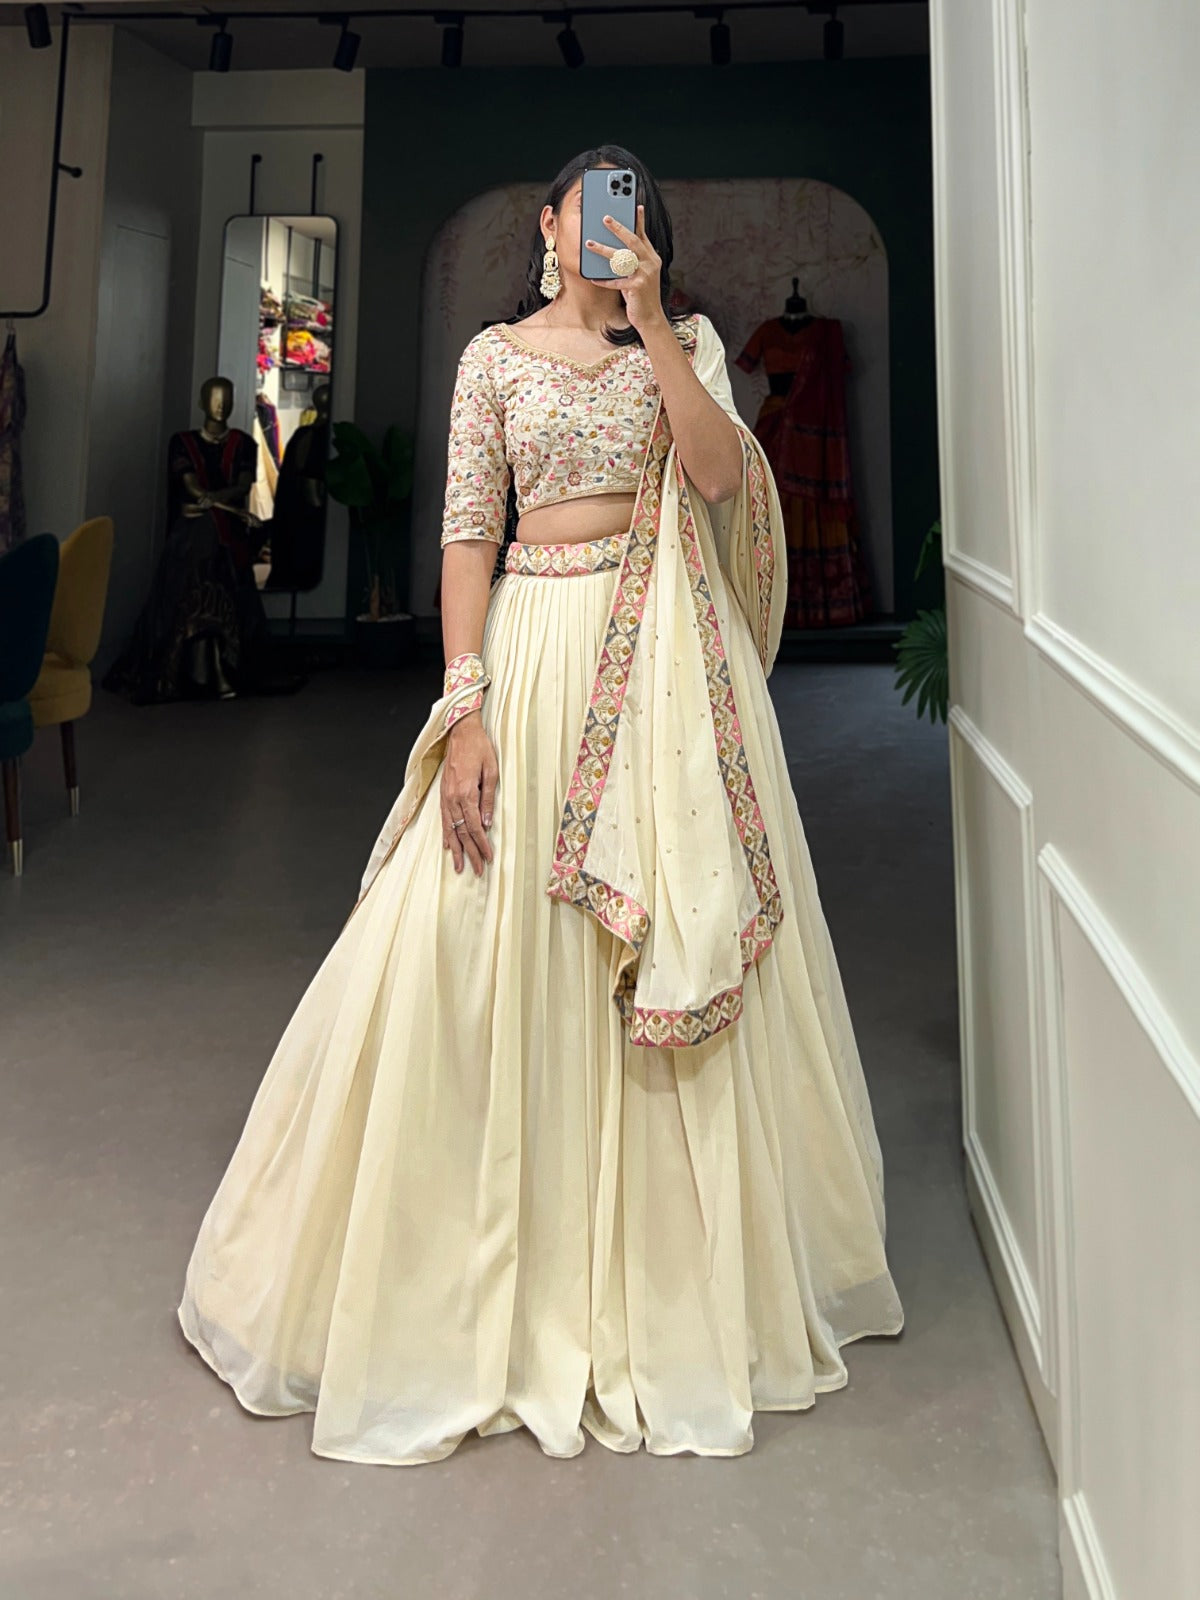 Exquisitely Embroidered Off-White Chaniya Choli with Shimmering Sequins for Garba Navratri